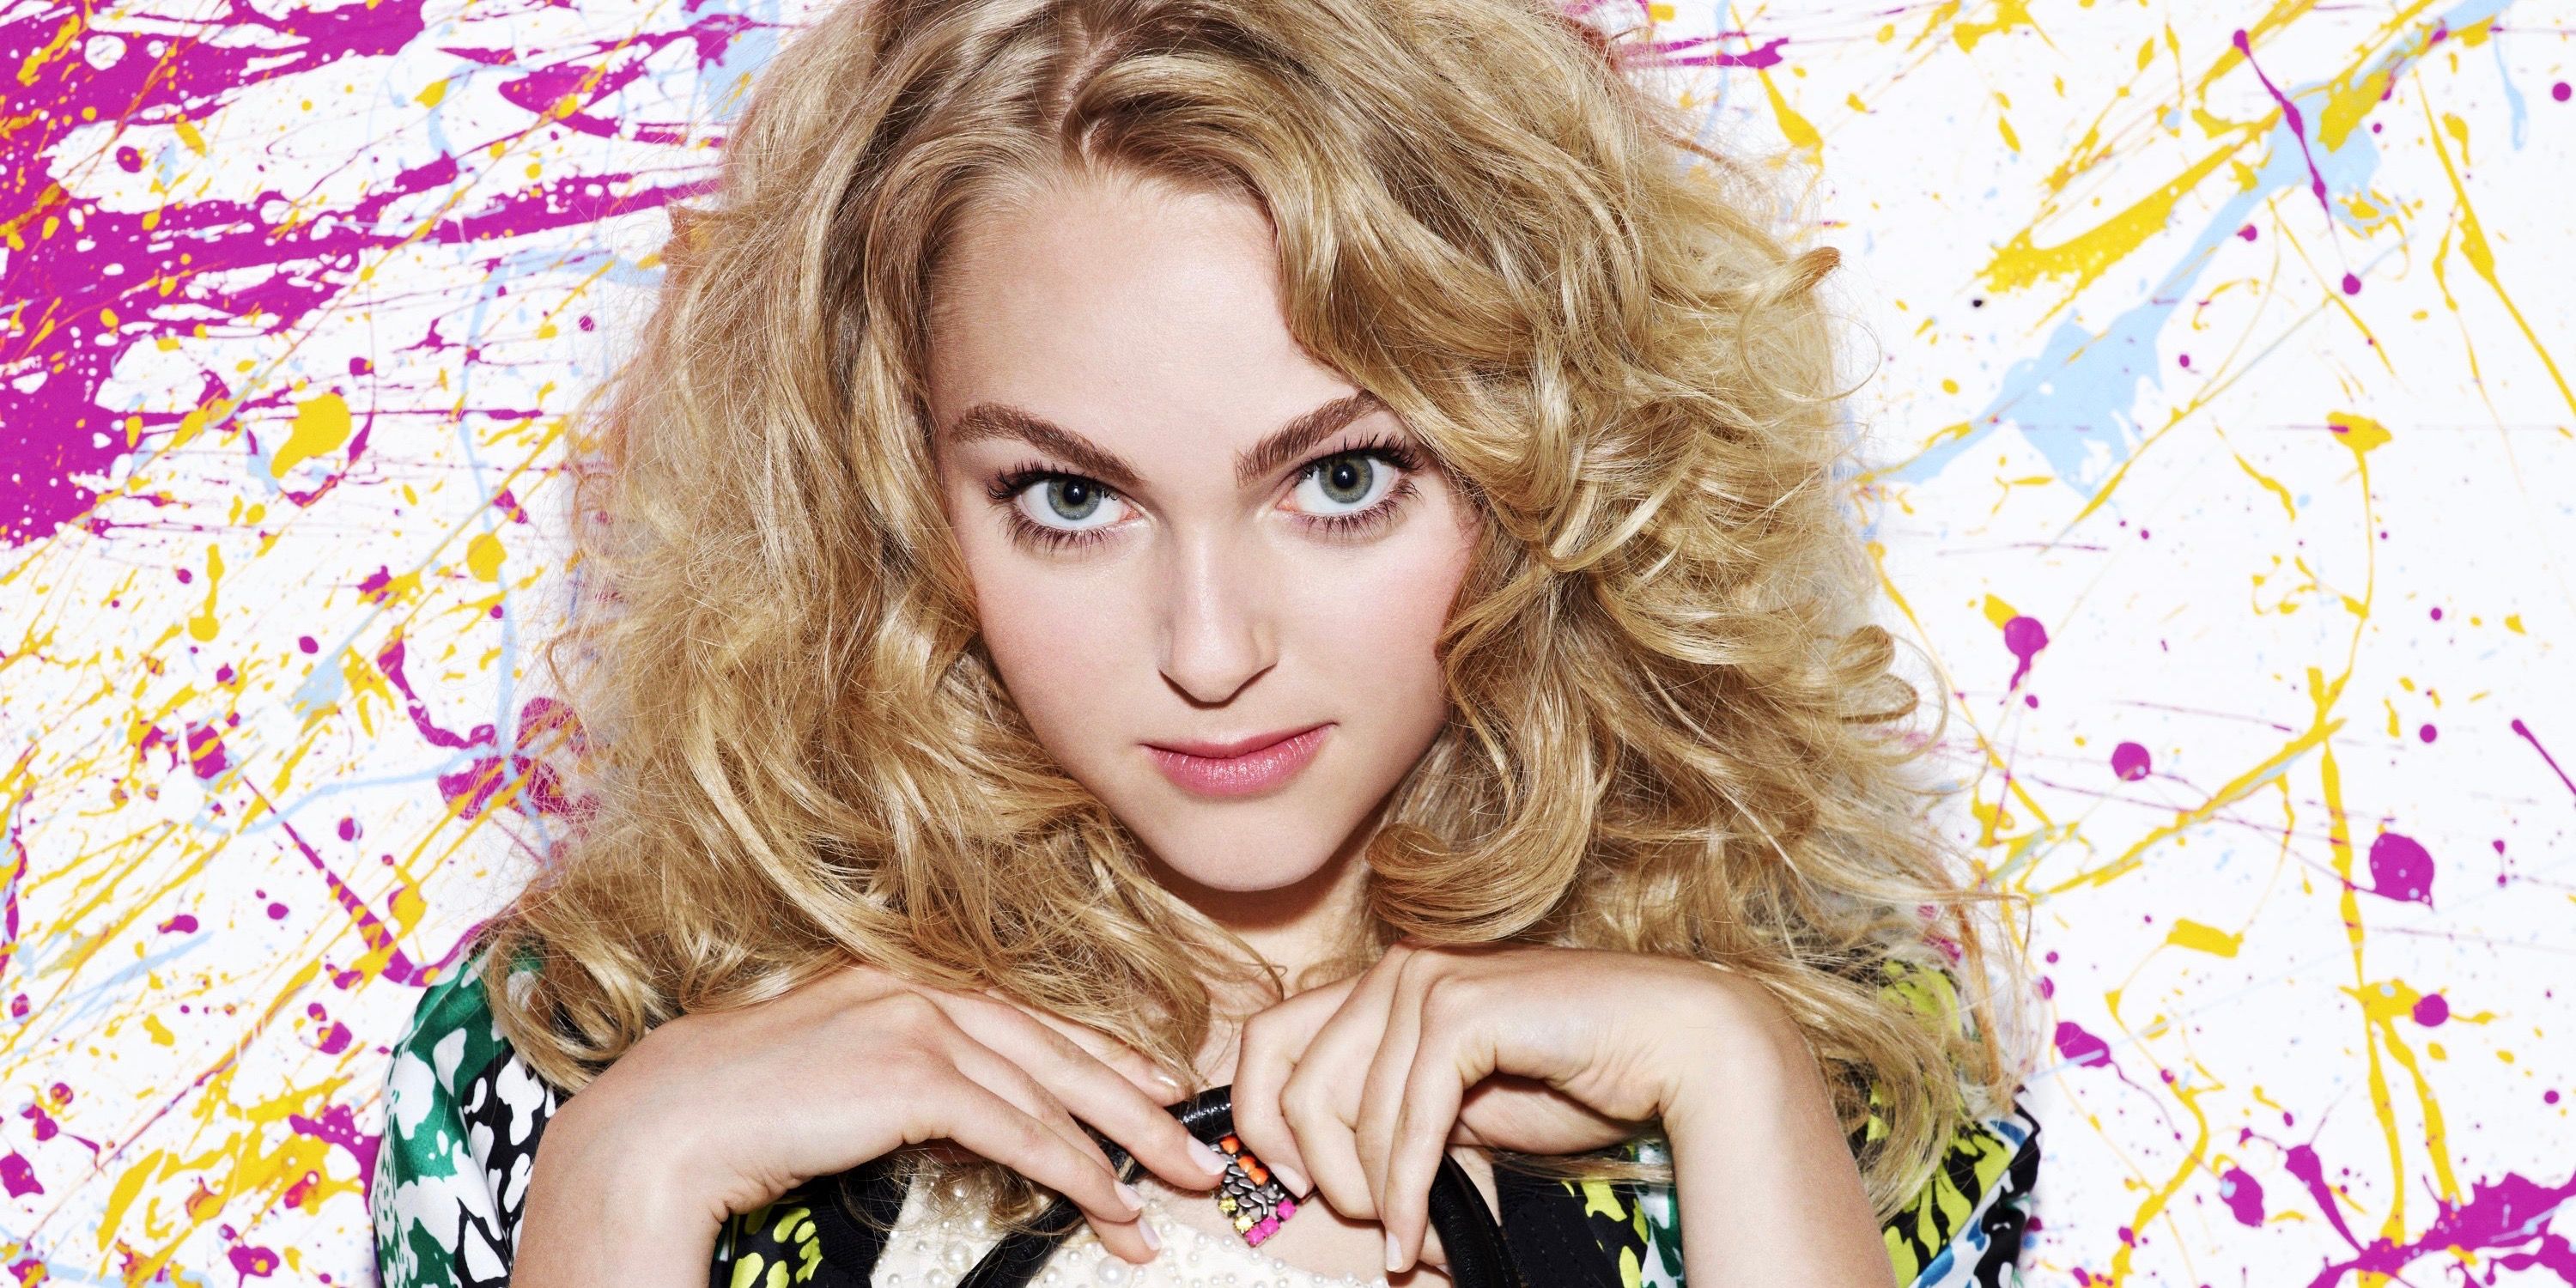 Promo image for The Carrie Diaries showing Carrie Bradshaw